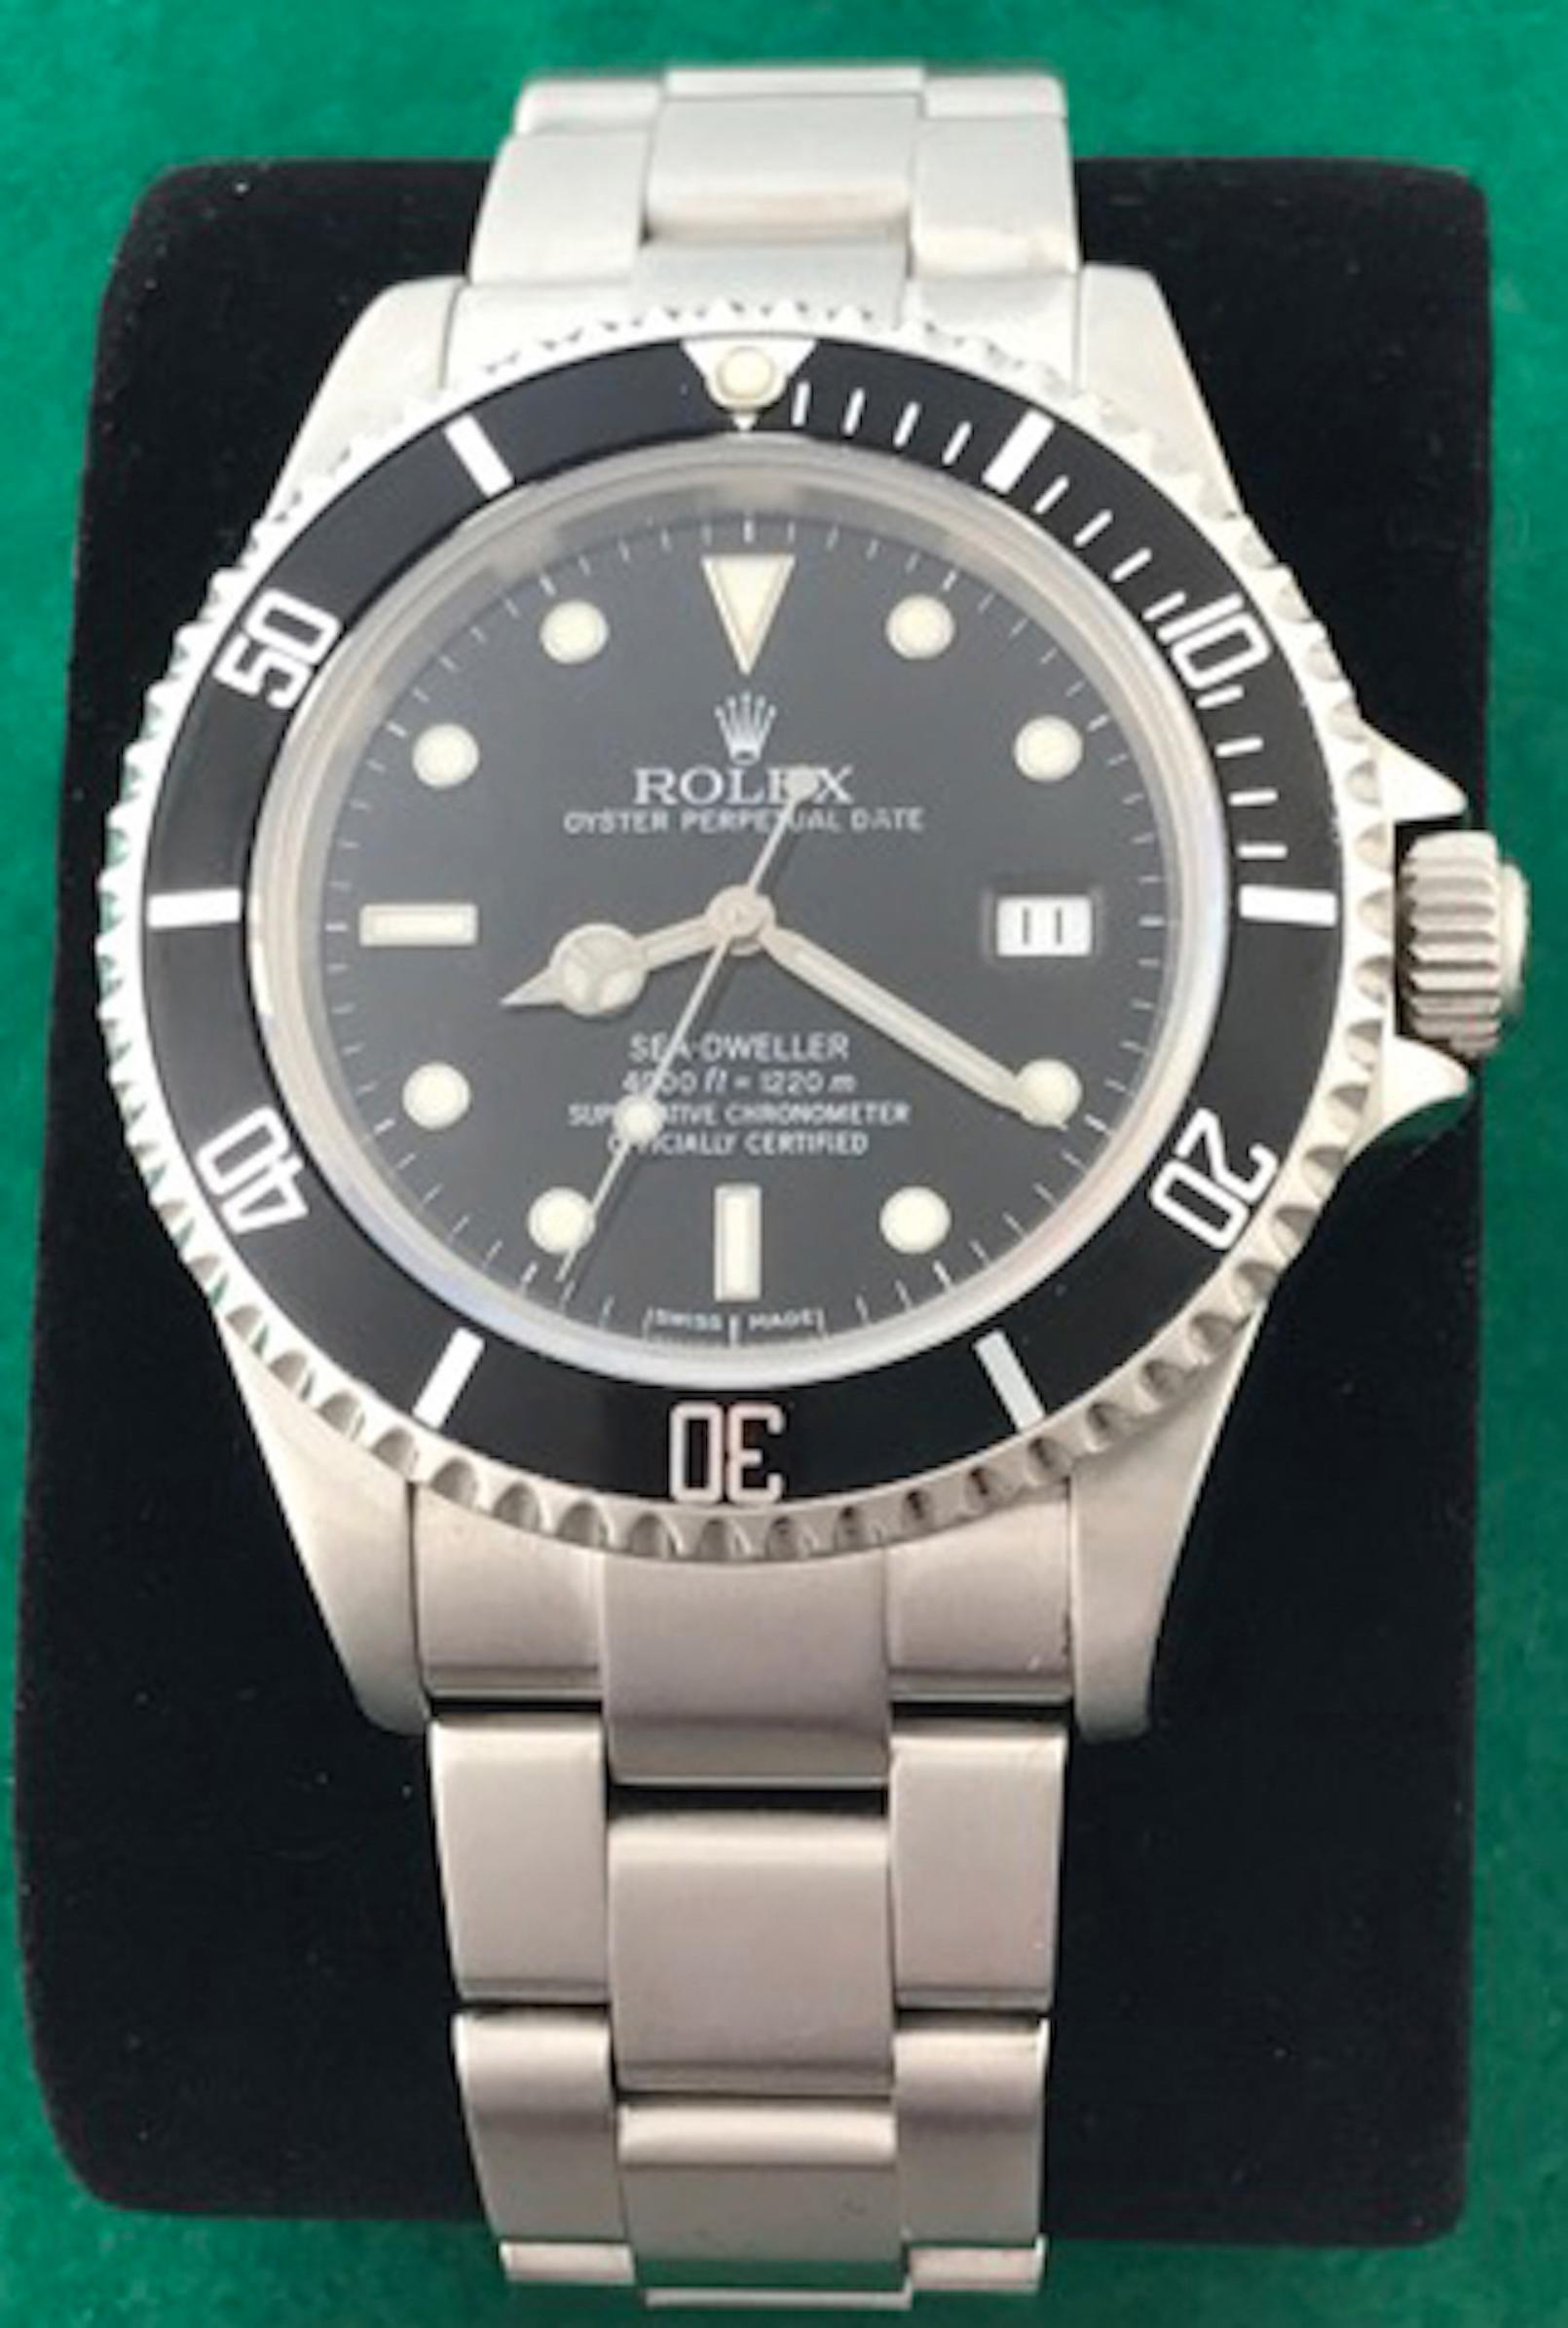 Contemporary Rolex Stainless Steel Sea Dweller Oyster Perpetual Automatic Wristwatch 16600